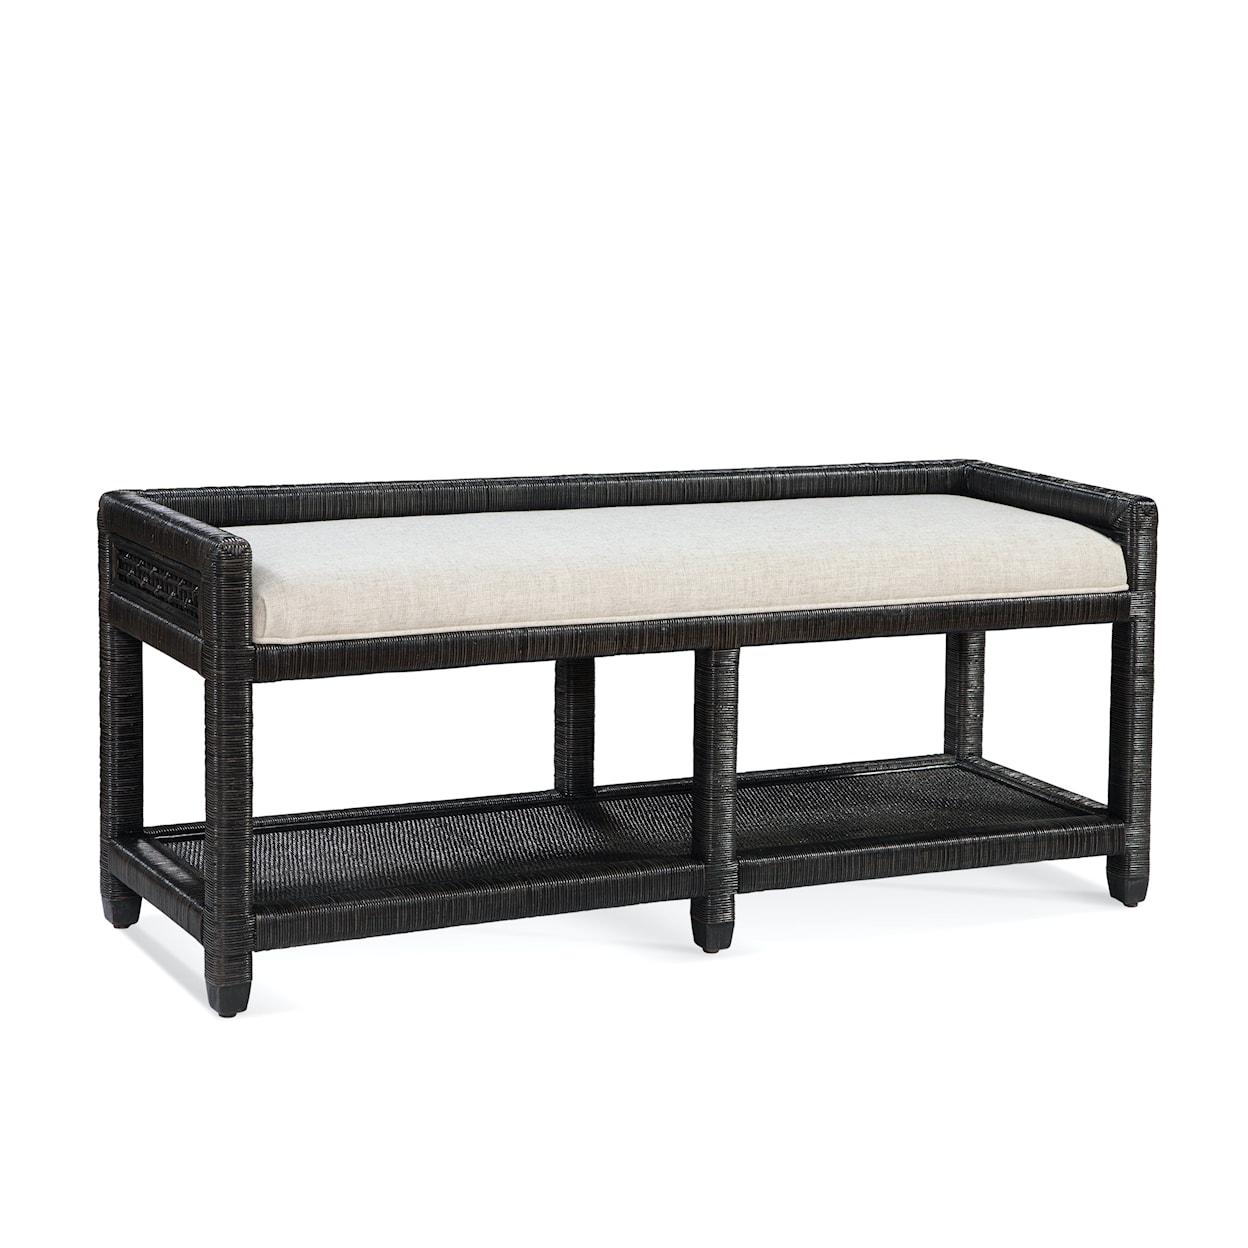 Braxton Culler Pine Isle Bench with Rail